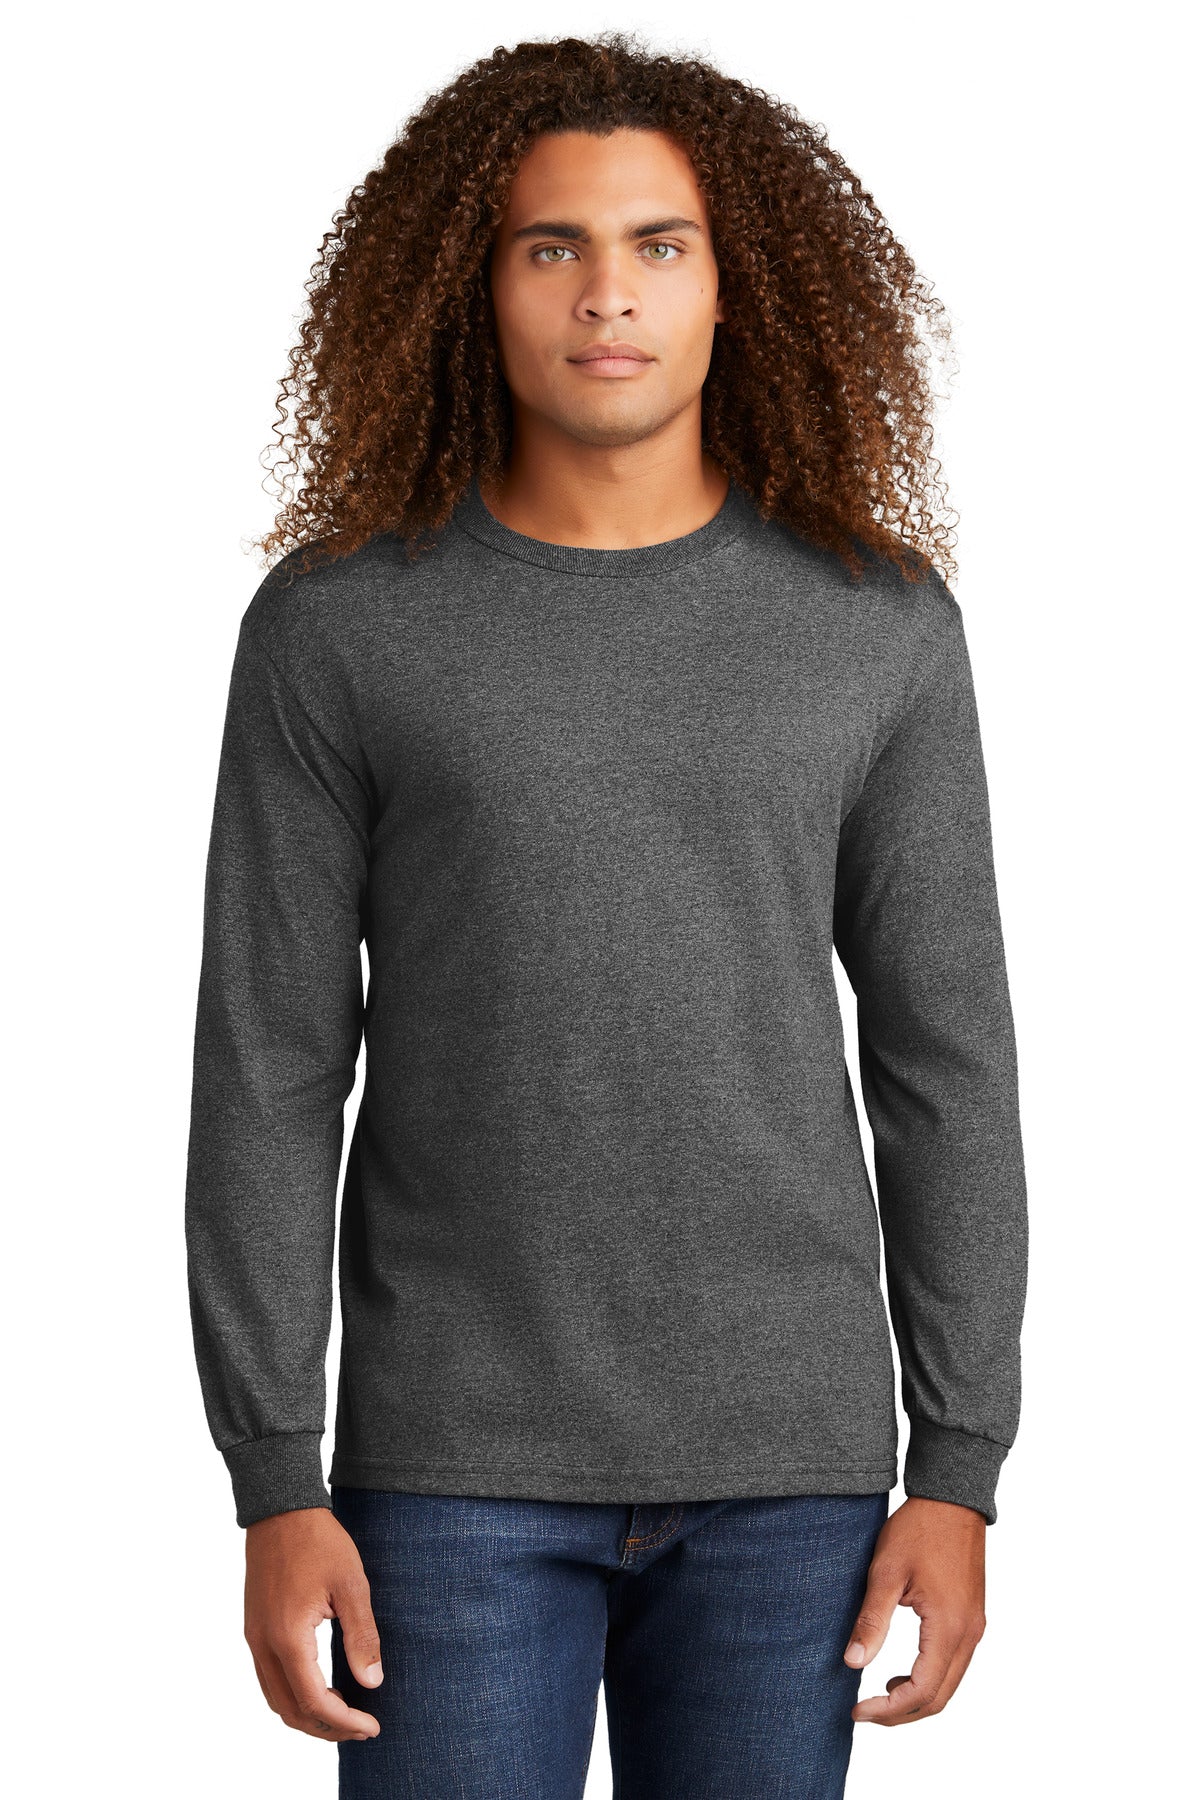 American Apparel Relaxed Long Sleeve T-Shirt